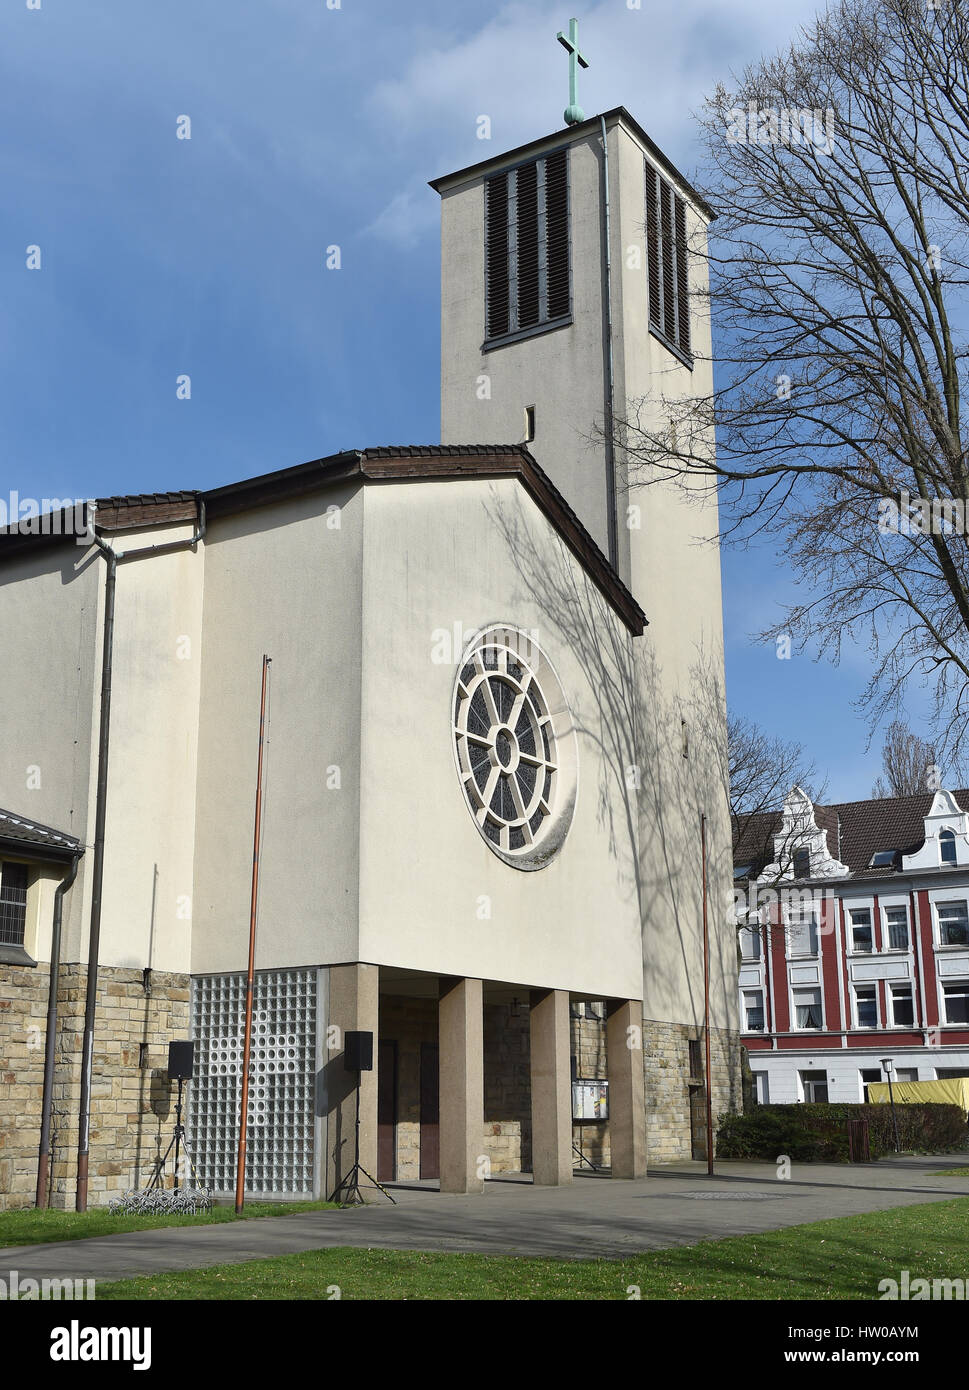 Herne, Germany. 15th Mar, 2017. The Sacred Heart Church (Herz-Jesu-Kirche) in which an ecumenical memorial service is to take place for the two murder victims in Herne, Germany, 15 March 2017, Relatives, friends, neighbours and classmates are expected to attend the commemorative event. Photo: Caroline Seidel/dpa/Alamy Live News Stock Photo